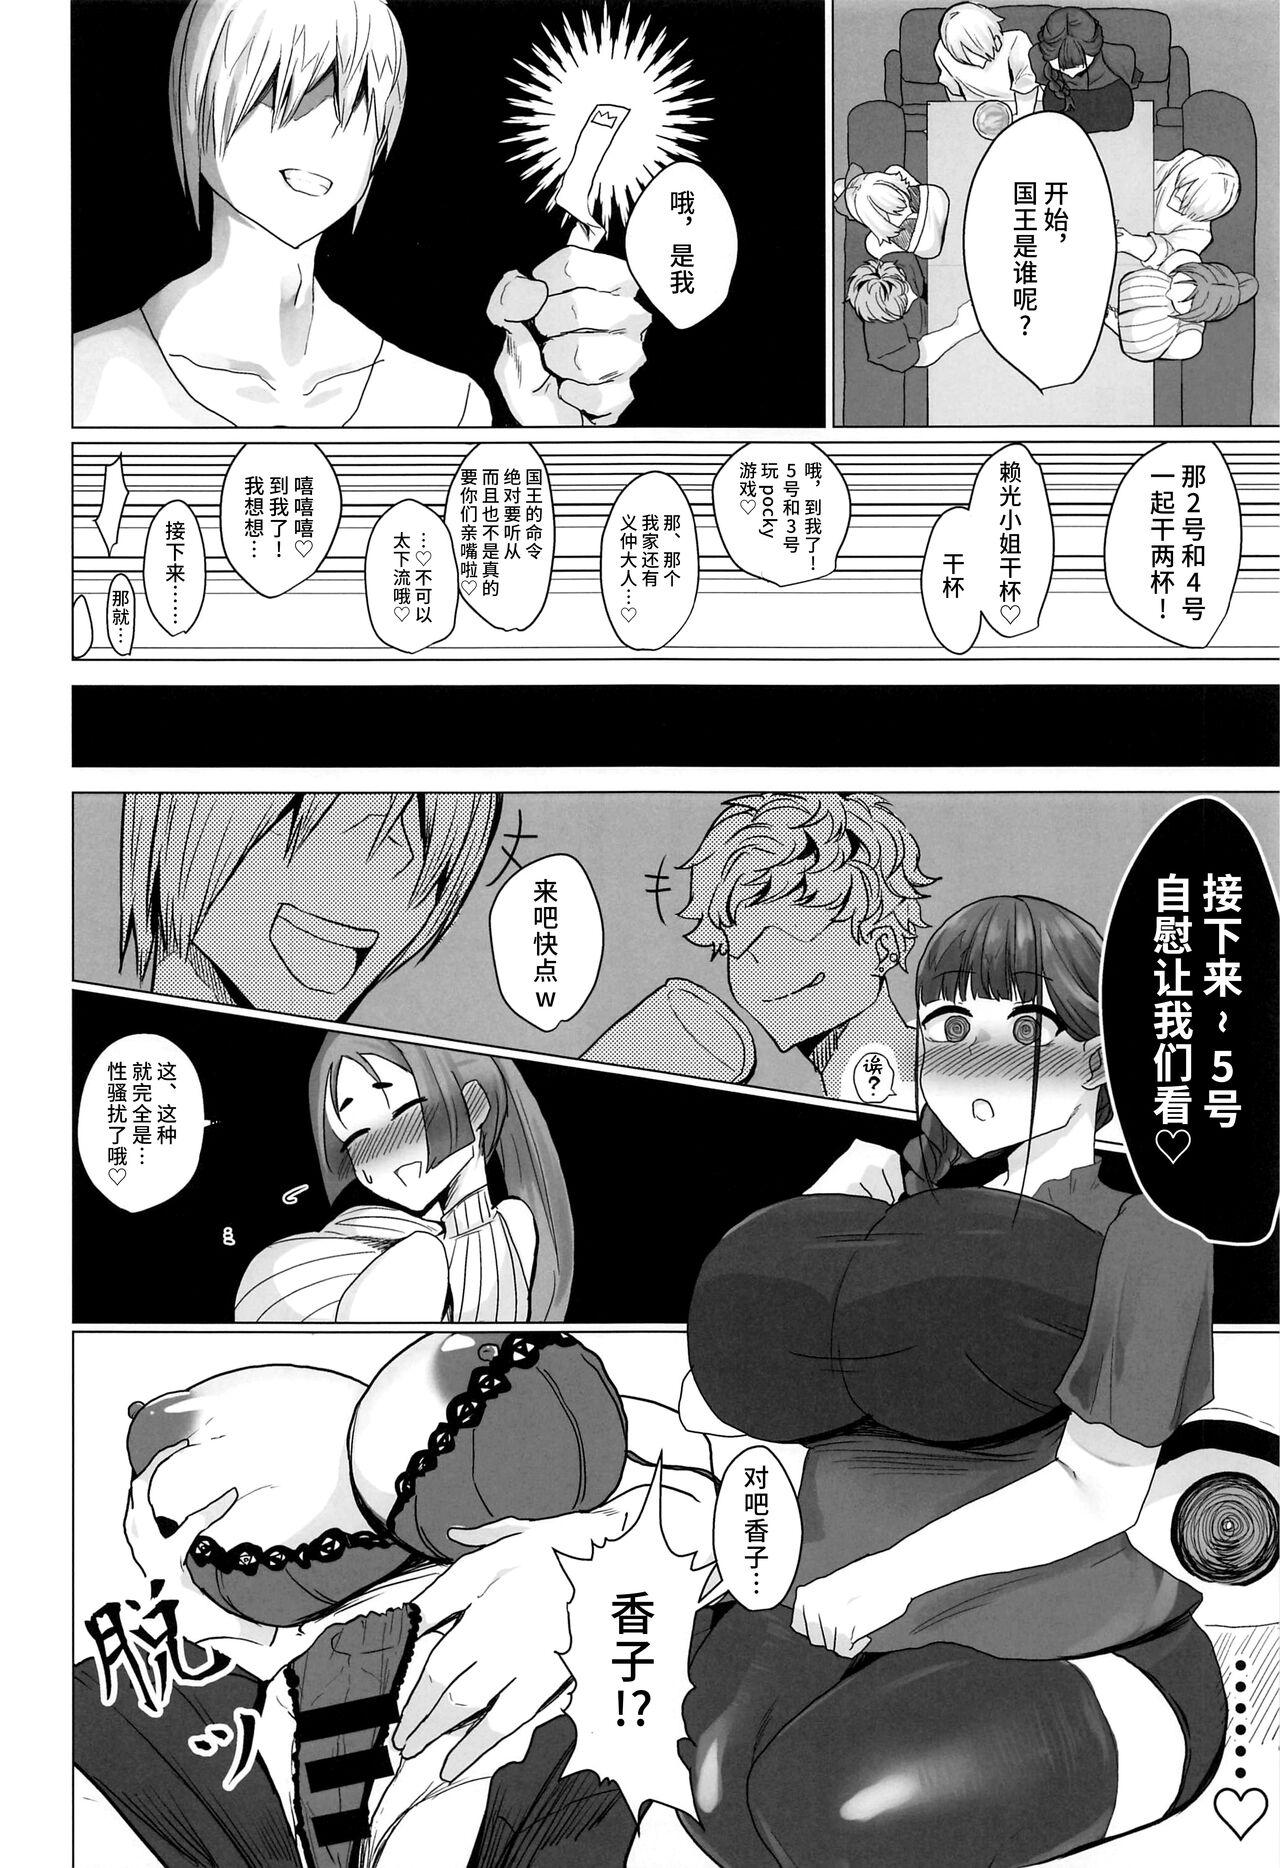 Thot 王様の言う事は絶対 - Fate grand order Cock Suckers - Page 3